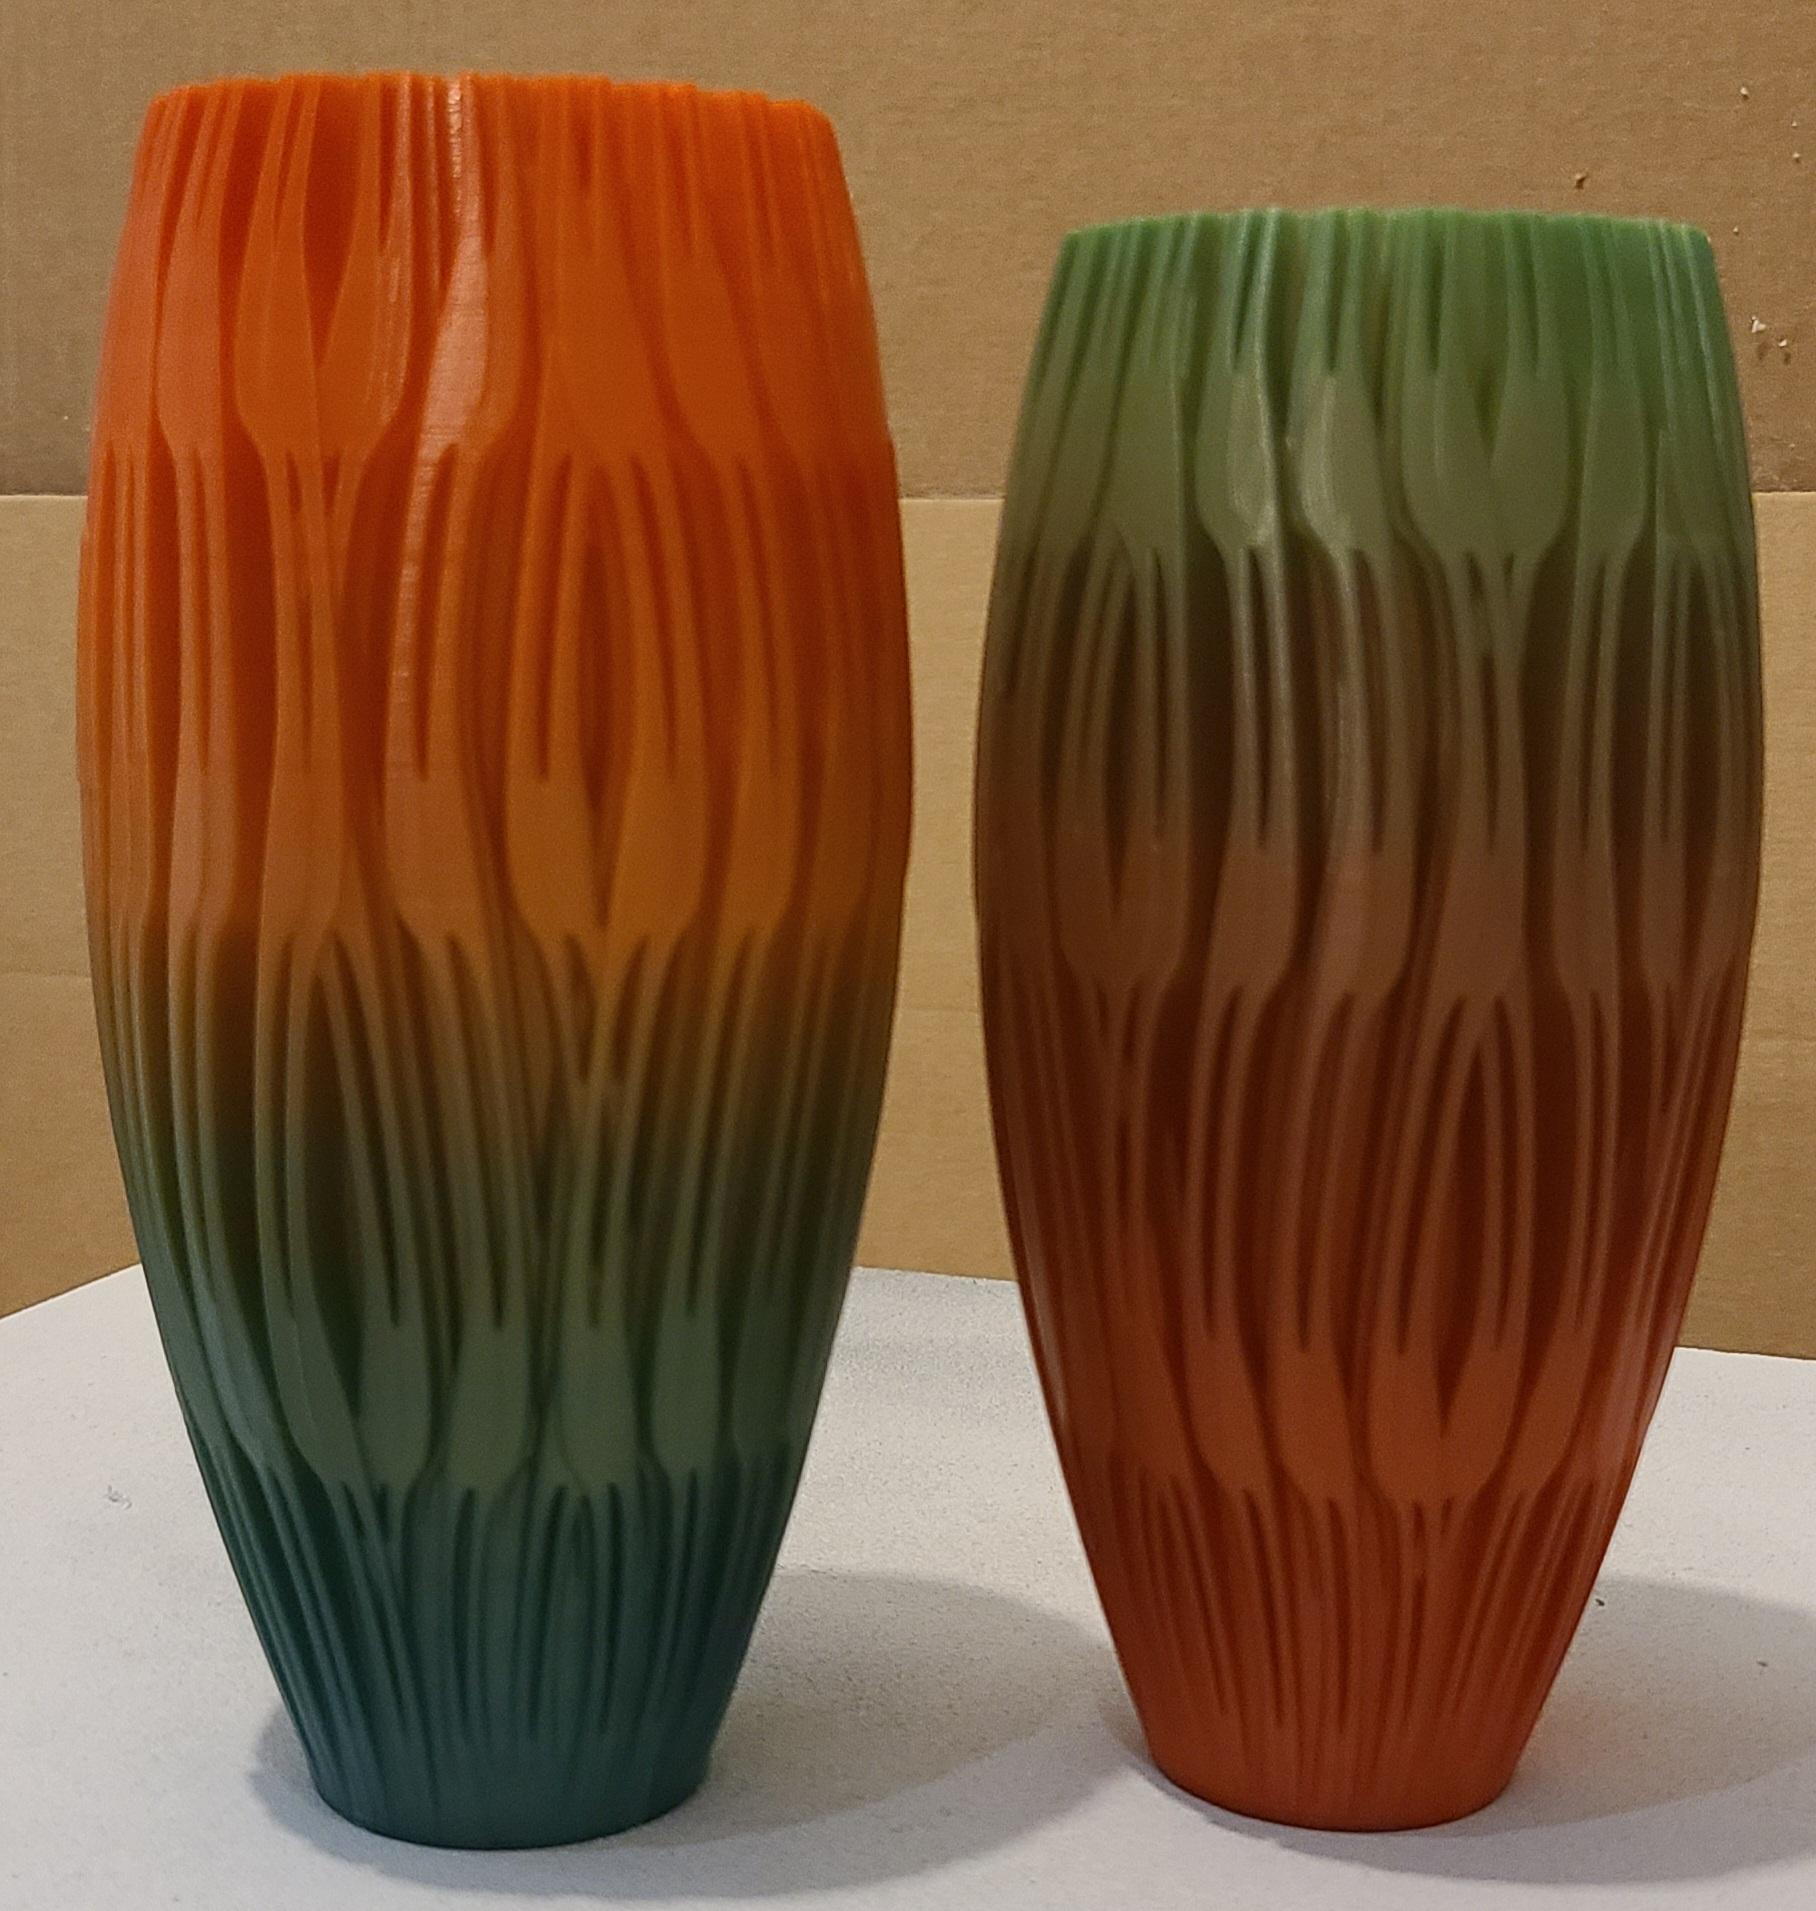 Curves Vase - Printed with some rainbow filament. Thanks for the model!! - 3d model